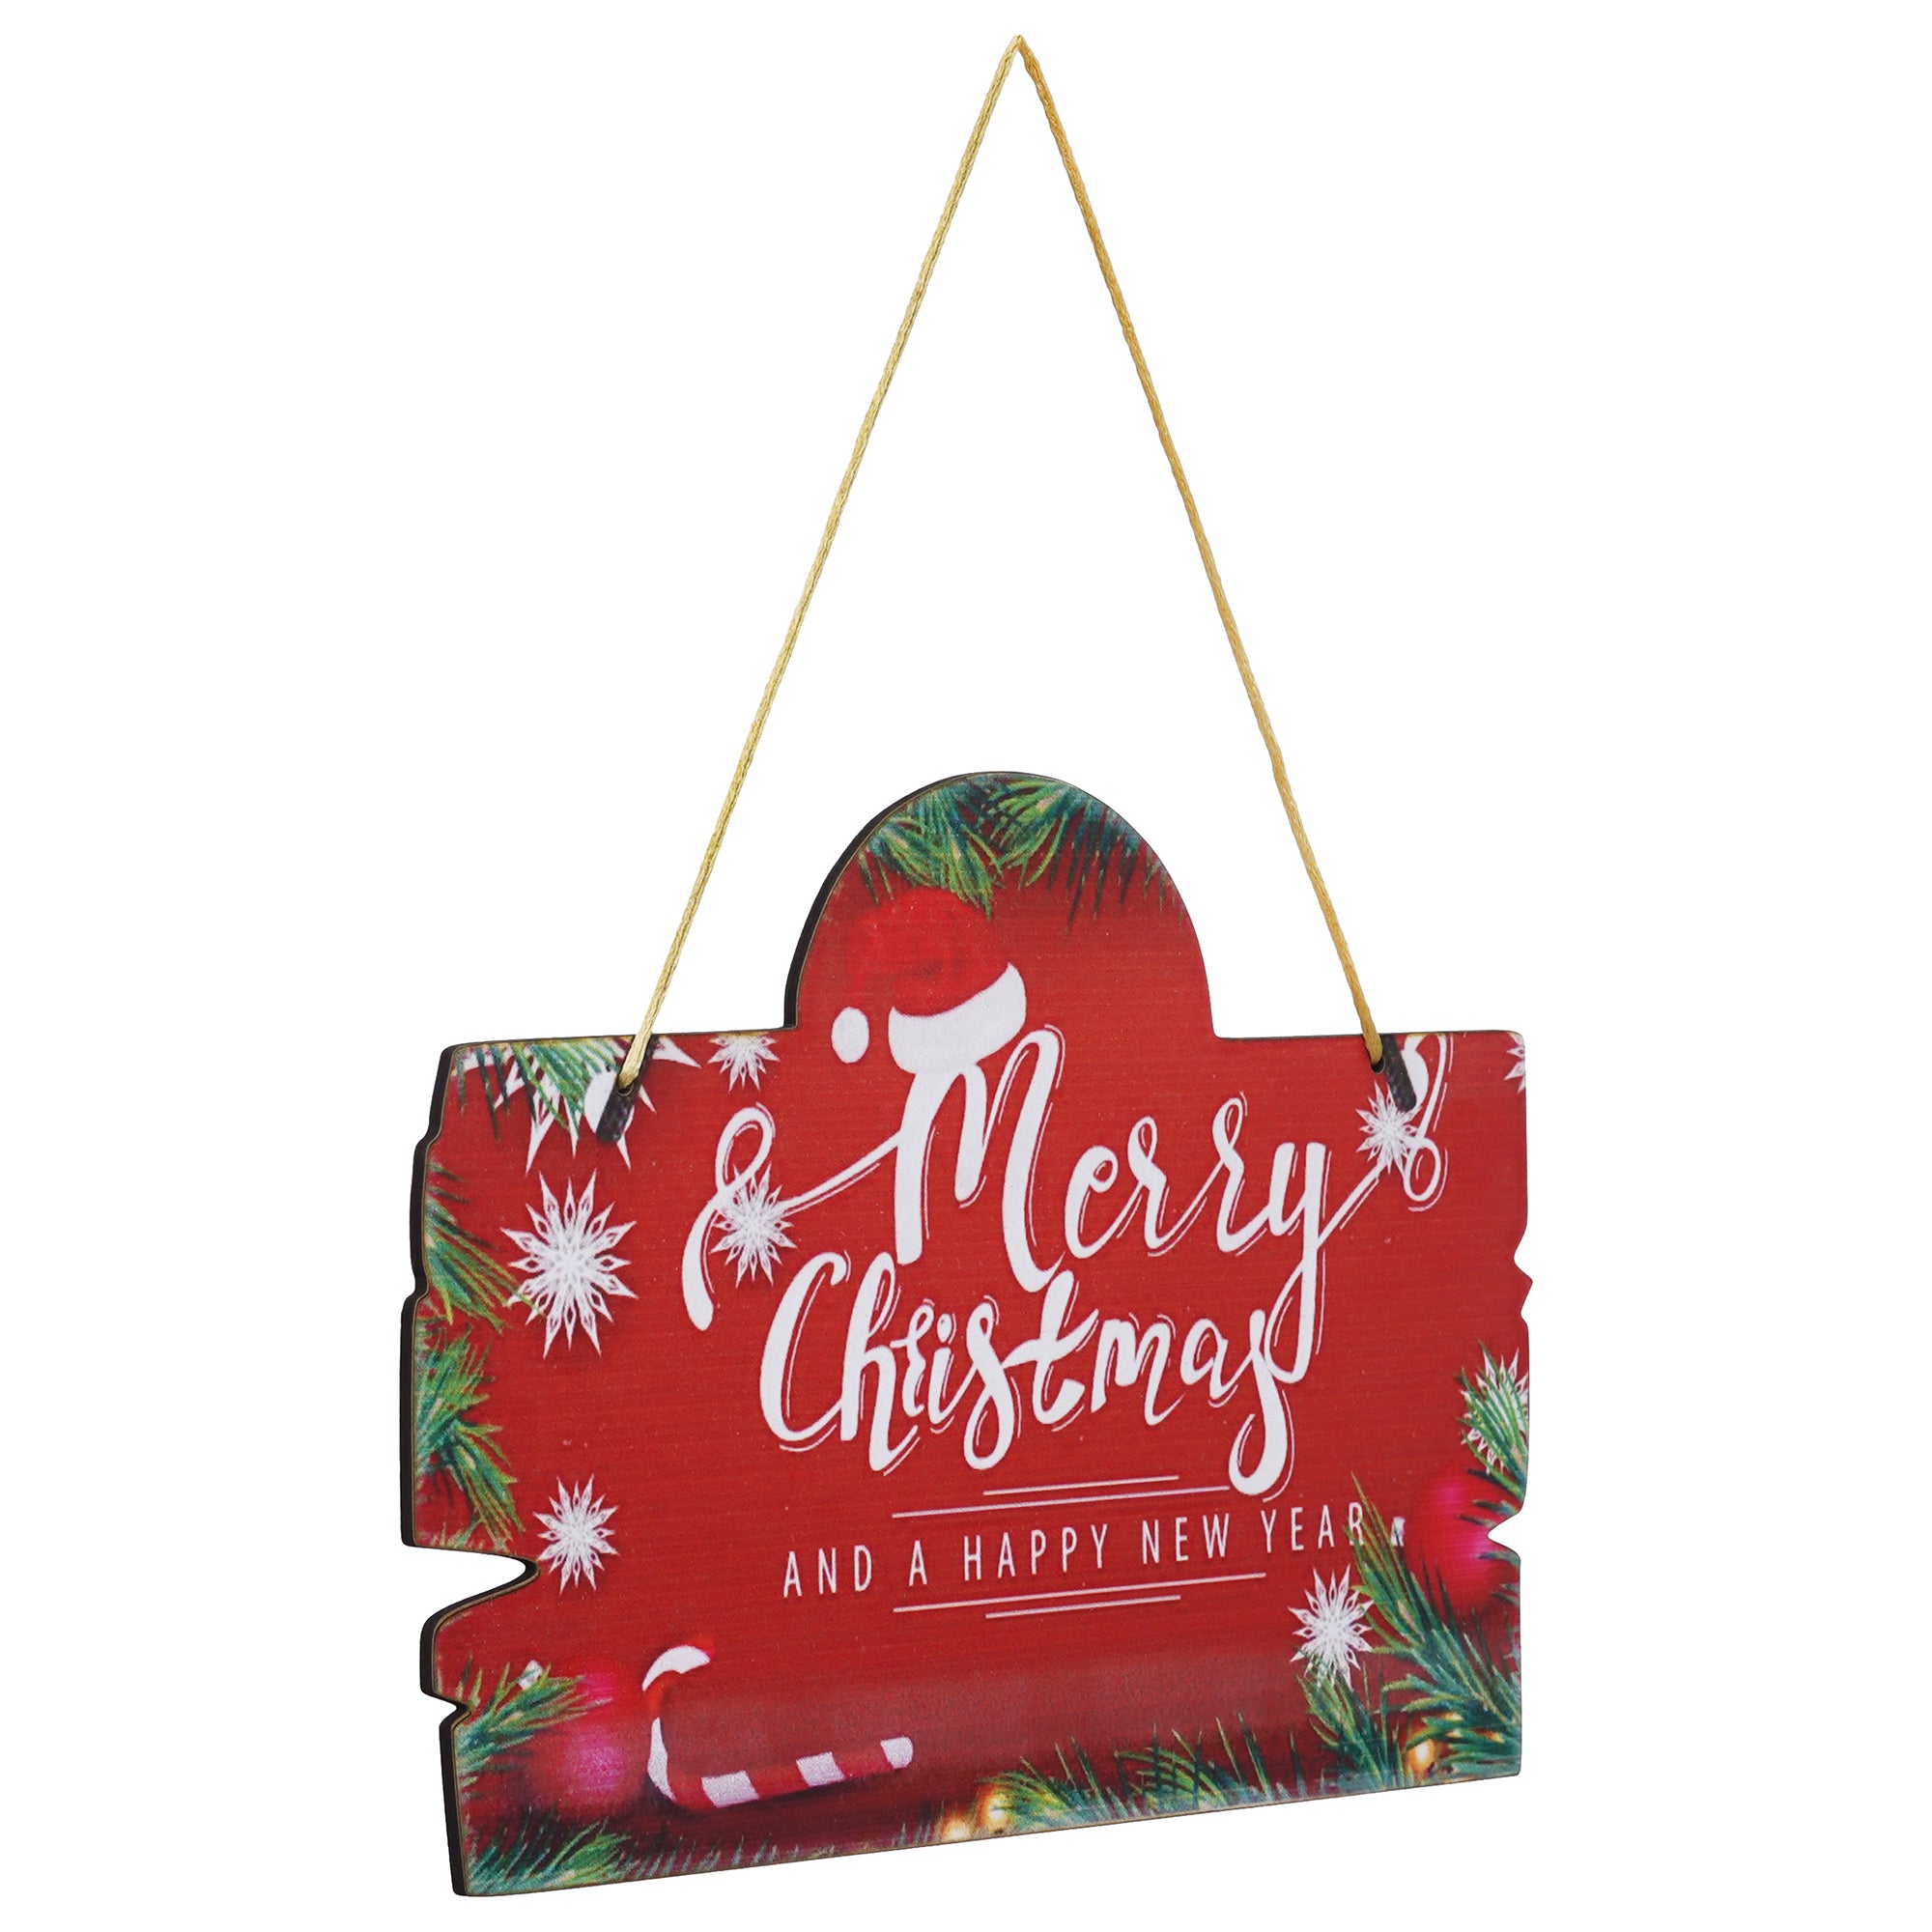 eCraftIndia "Merry Christmas and Happy New Year" Printed Door Wall Hanging for Home and Christmas Tree Decorations (Red, Green, White) 6